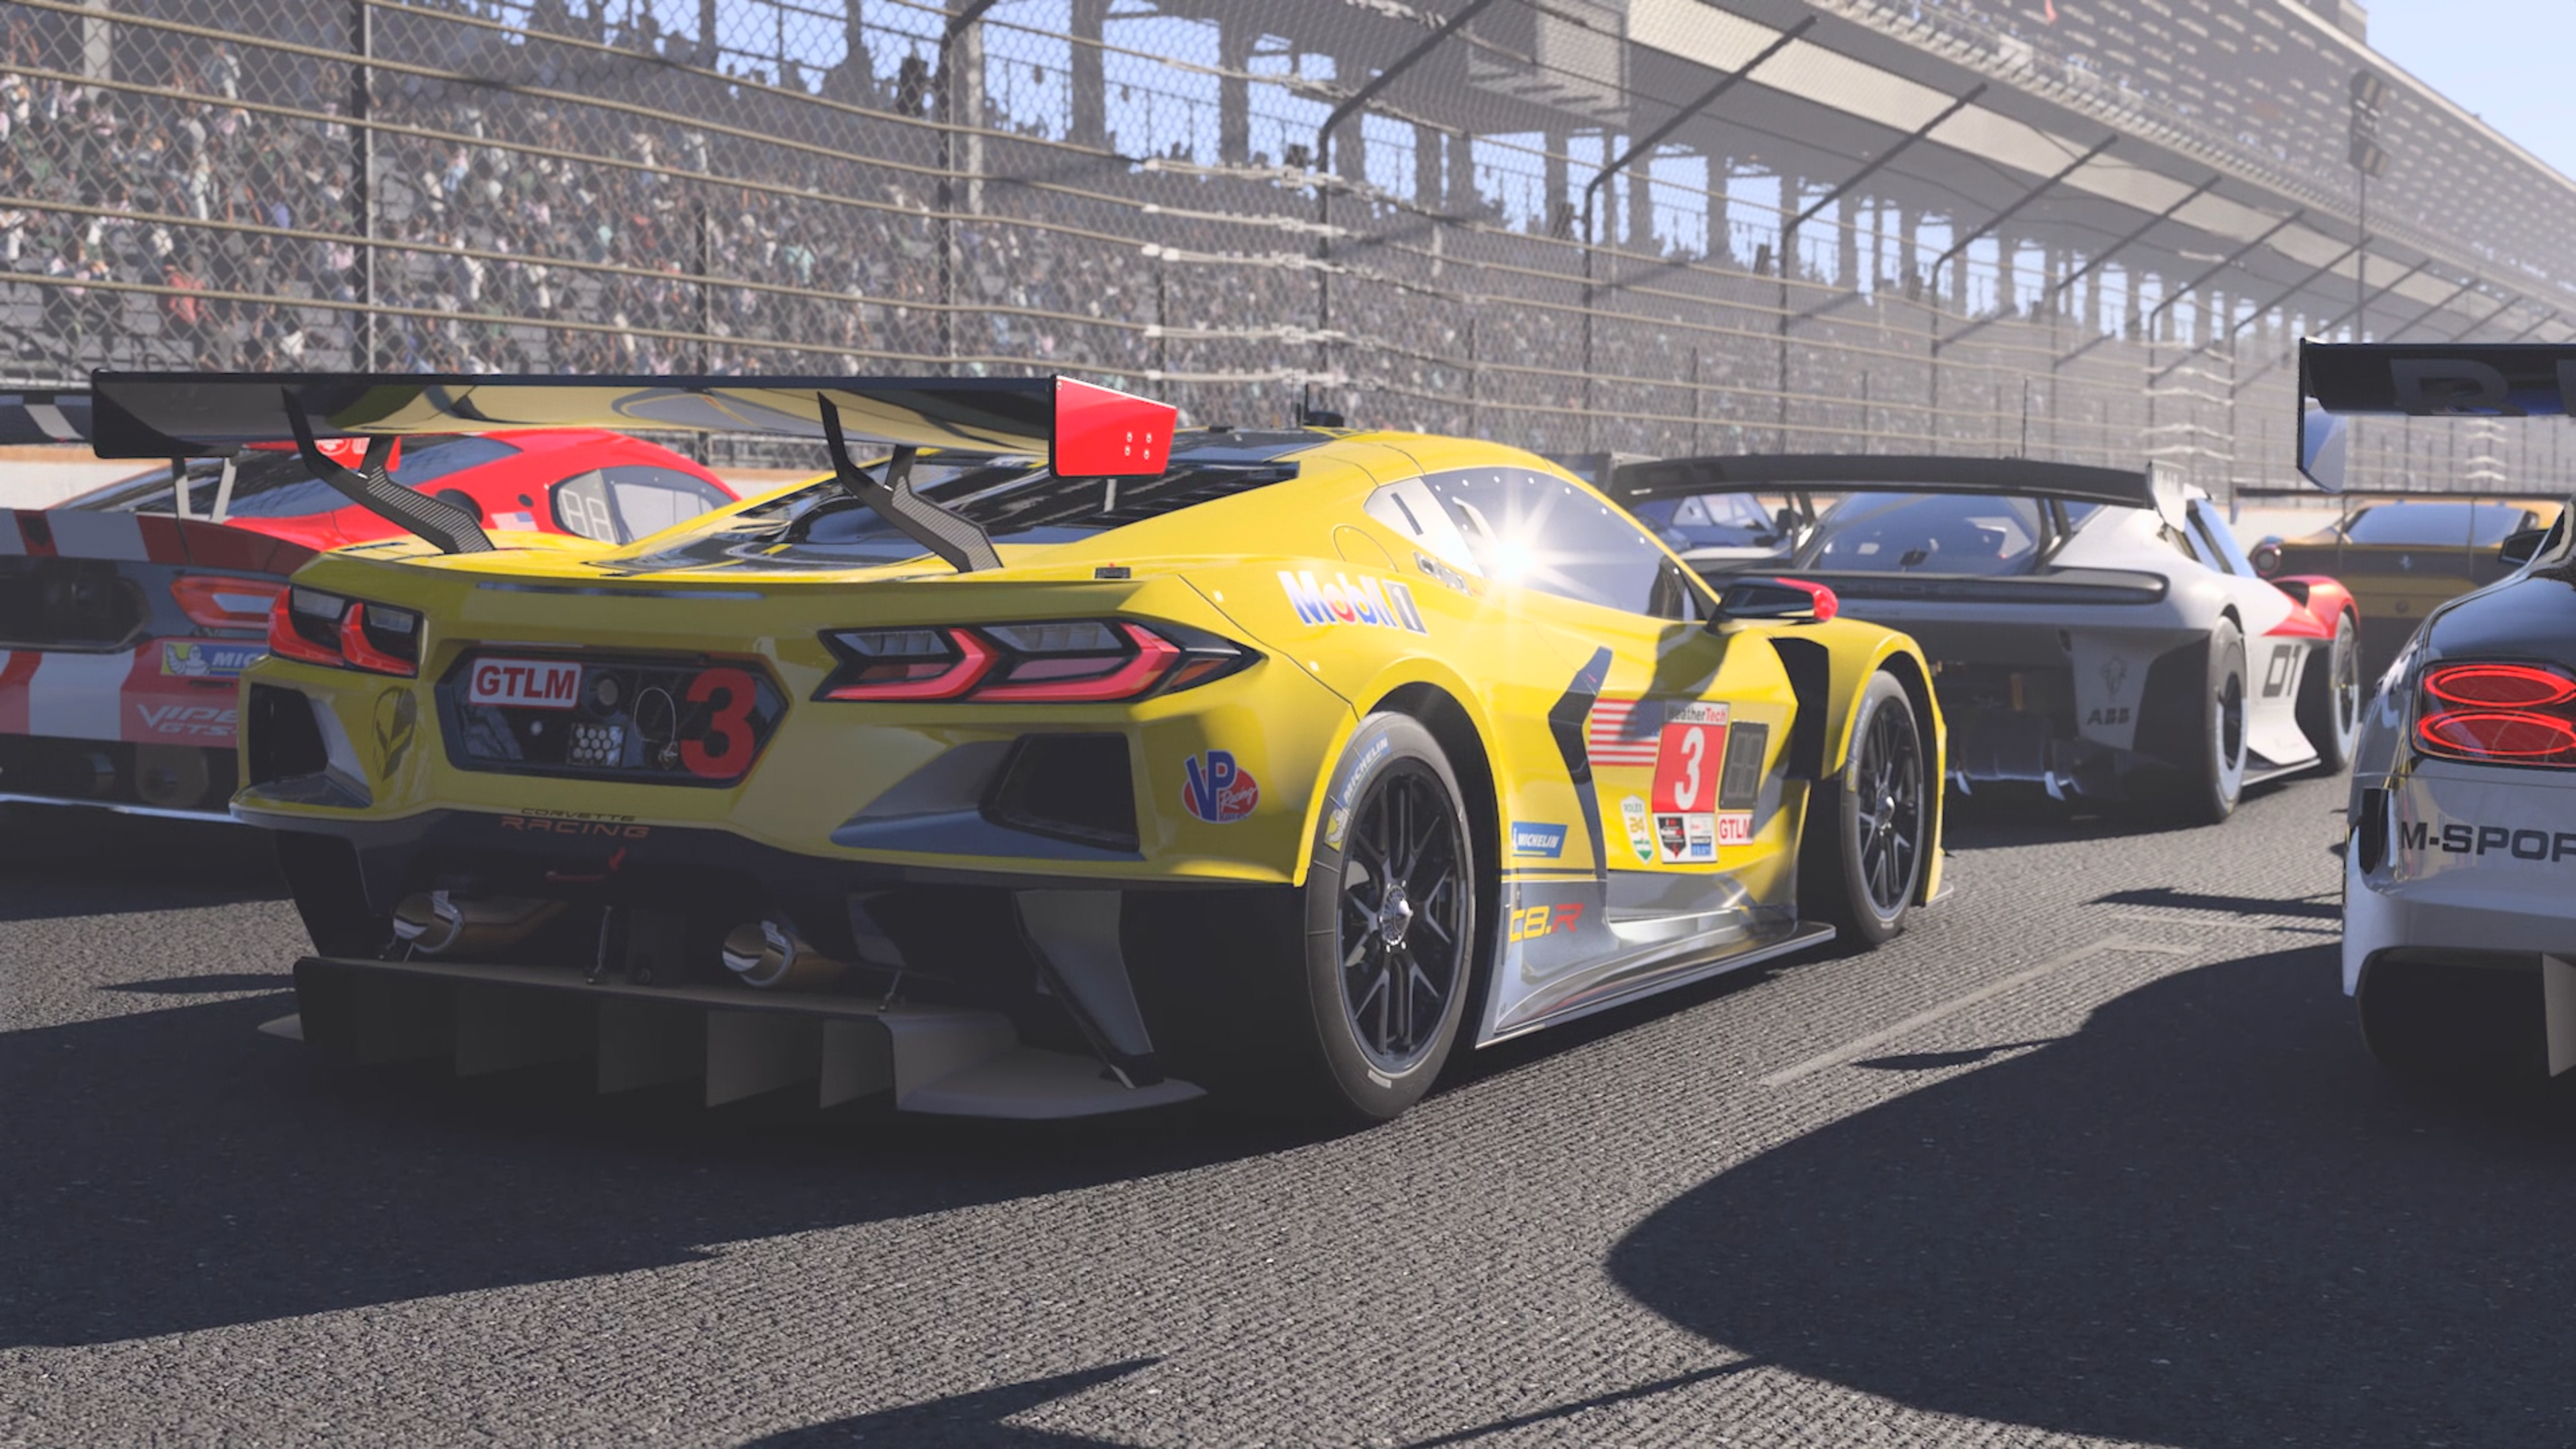 Forza 6 is the ultimate racing experience